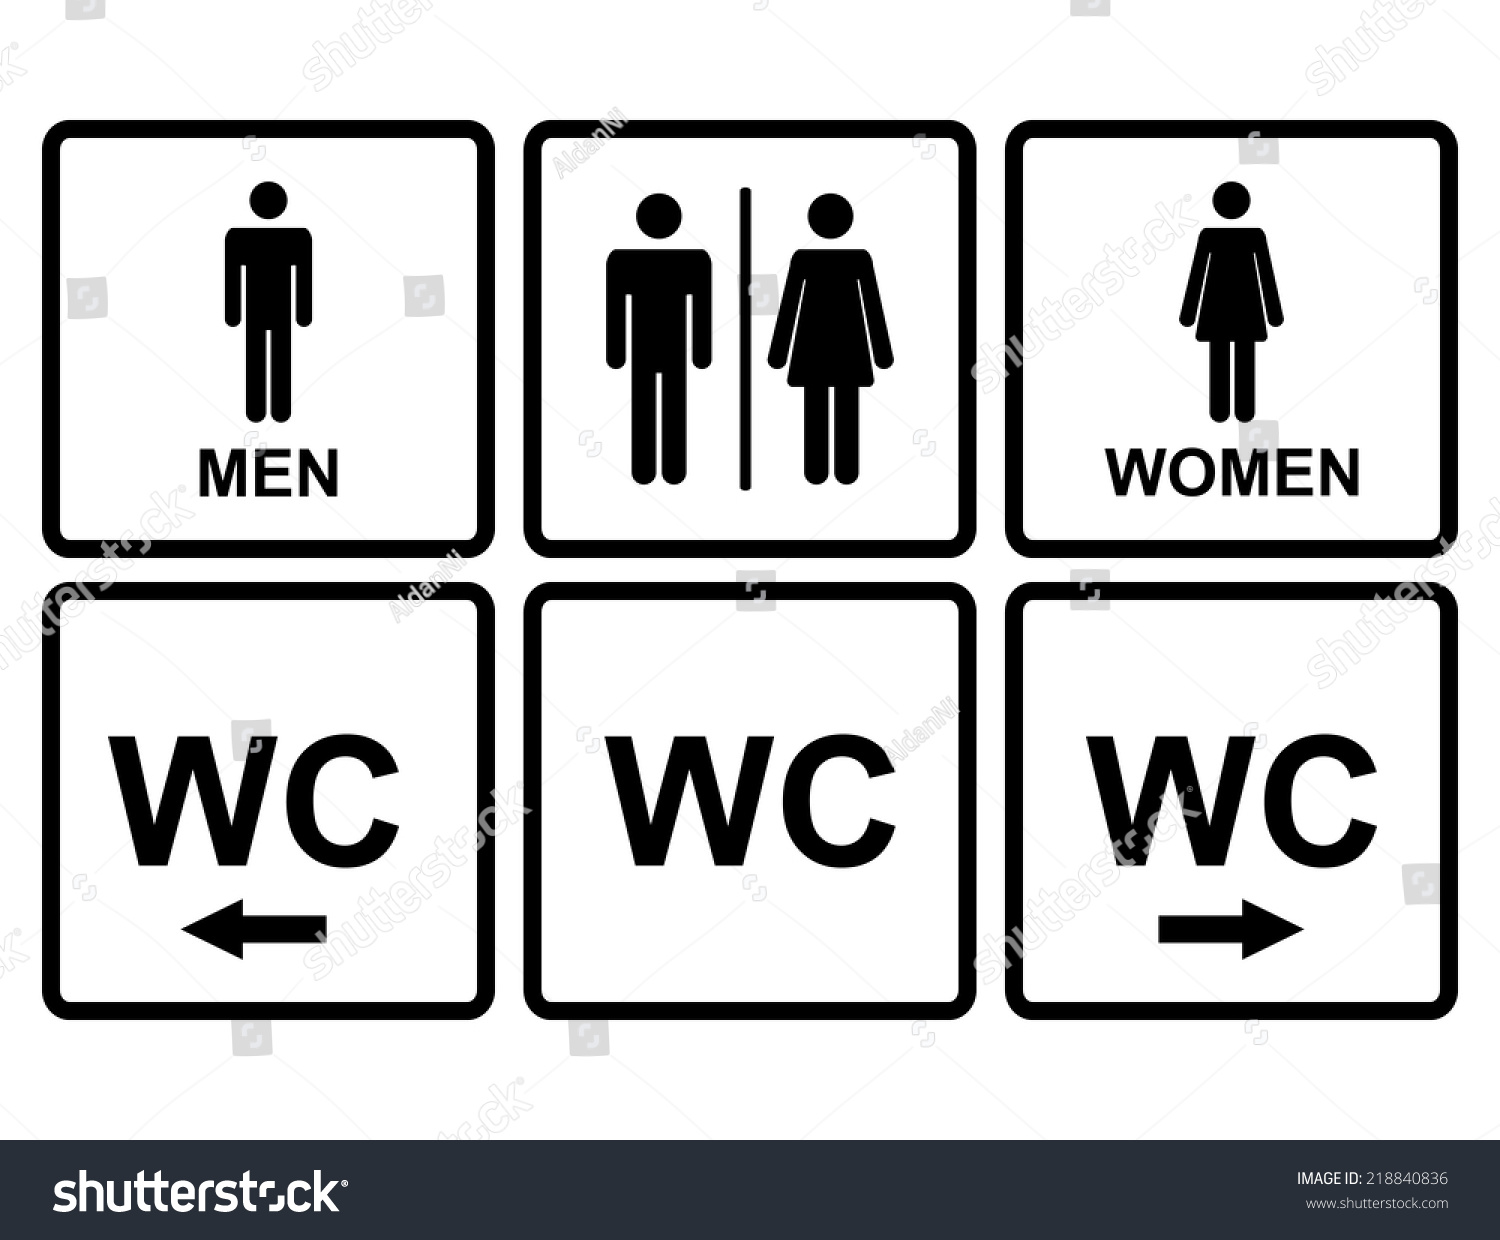 Male And Female Wc Icon Denoting Toilet And Restroom Facilities For